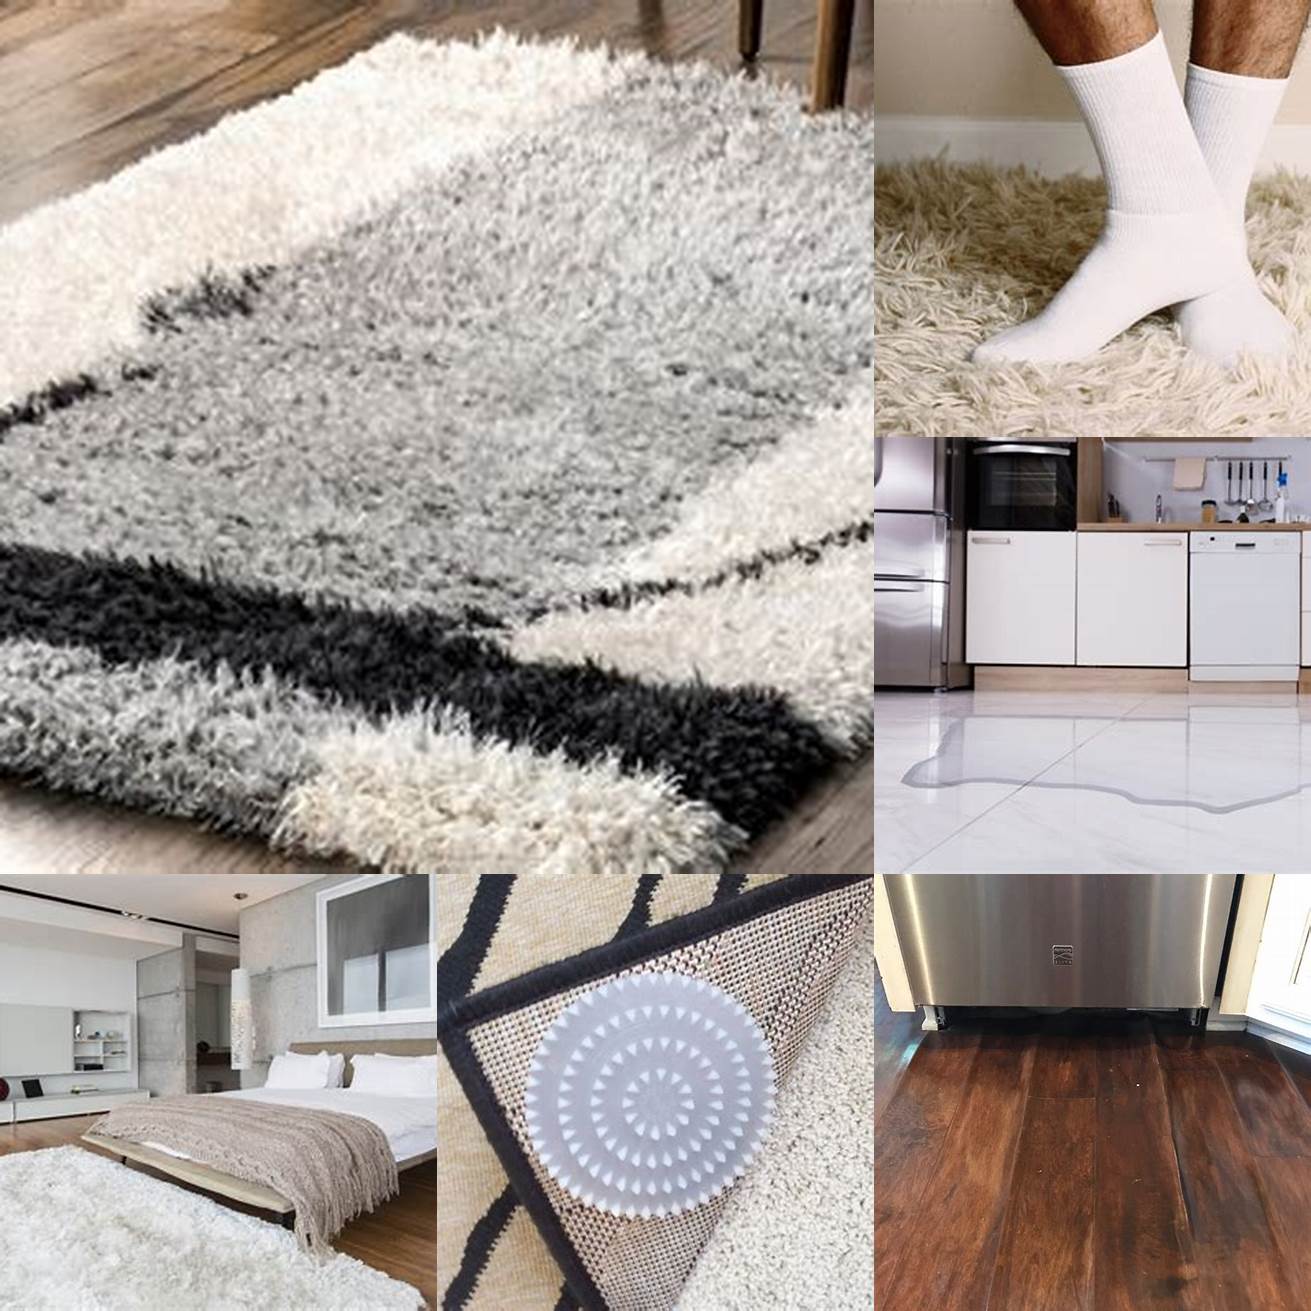 Avoid placing the rug in areas where it can get wet or damaged such as near the dishwasher or fridge